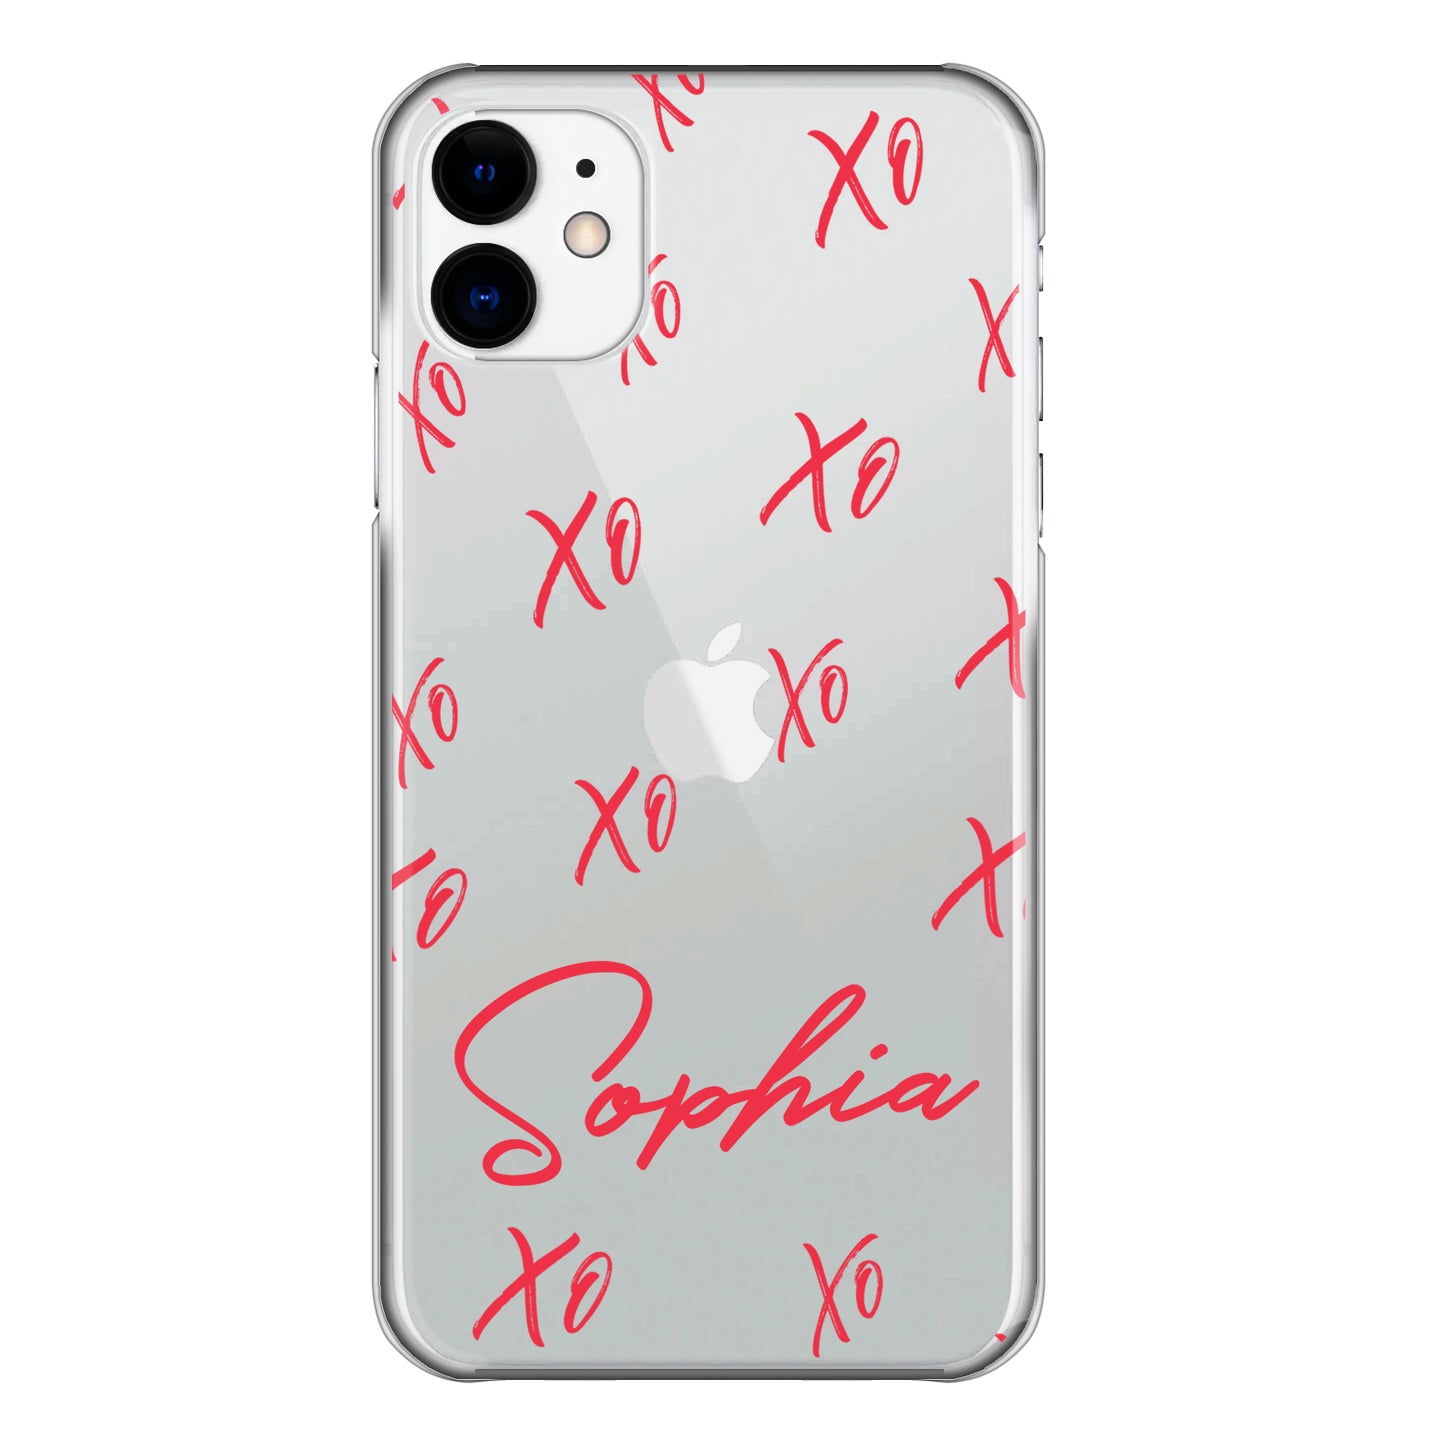 Personalised LG Phone Hard Case with Hugs/Kisses and Stylish Red Text